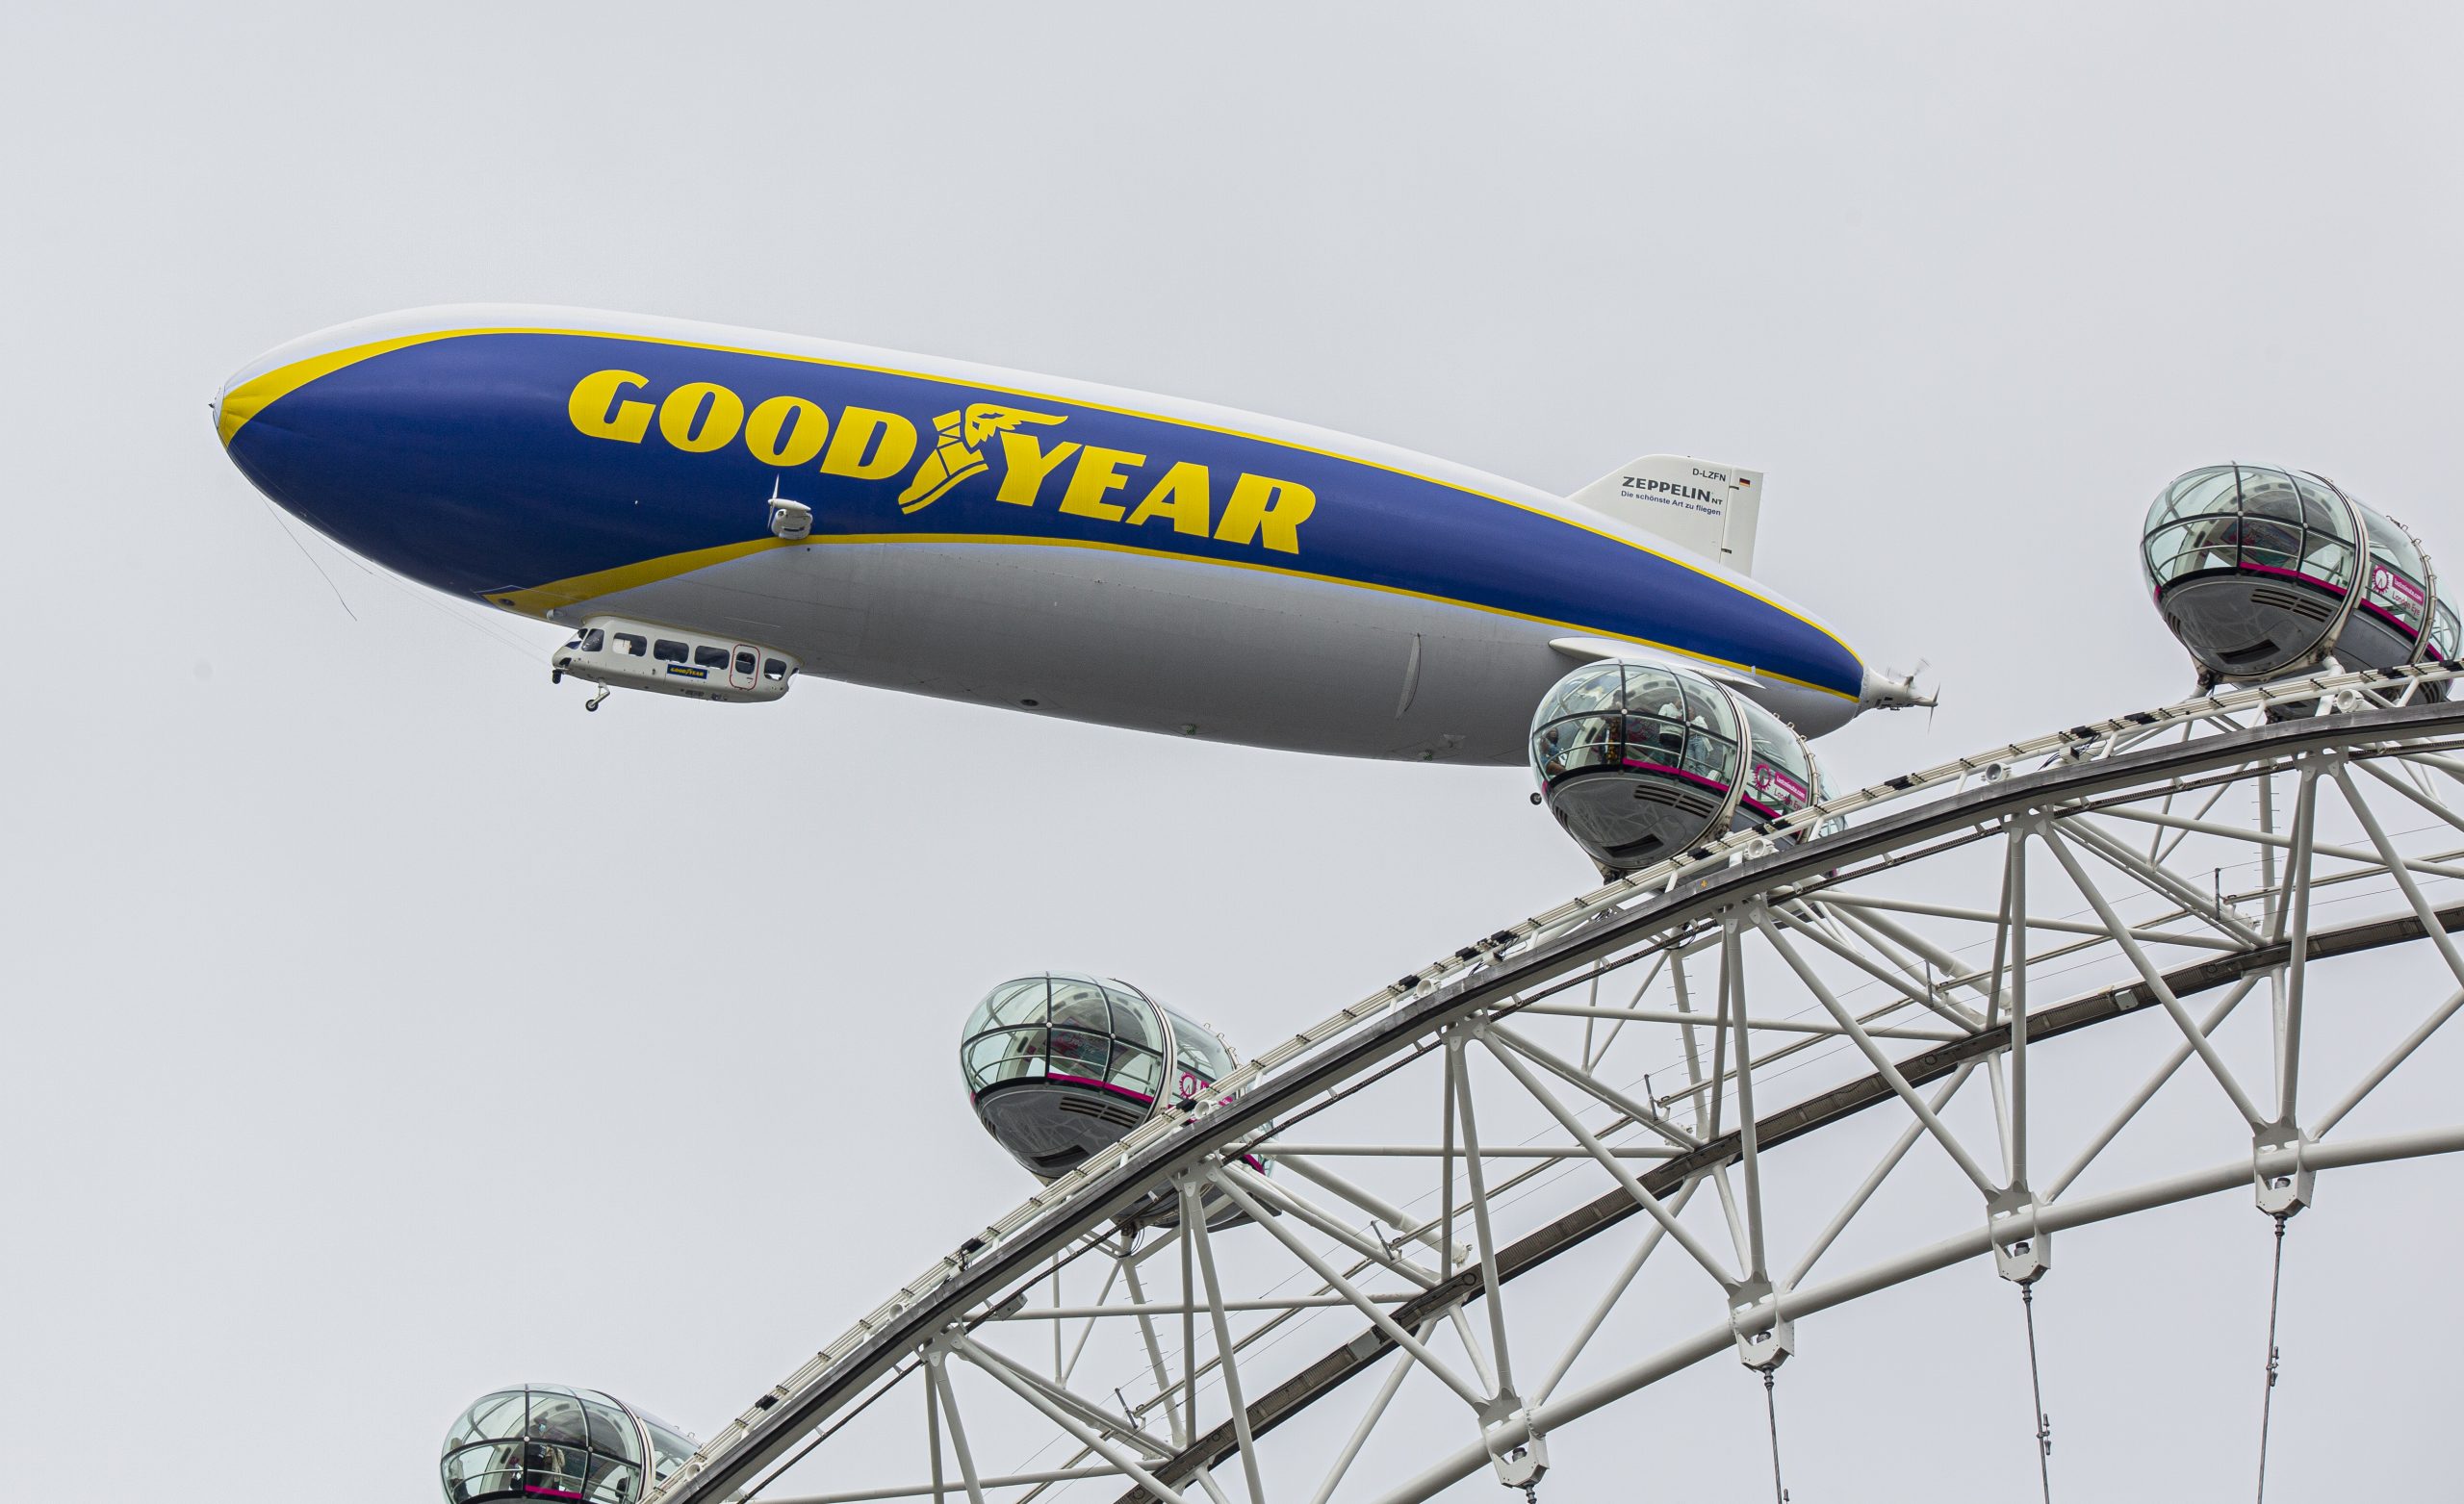 Transaid offers chance to win a flight on Goodyear Blimp